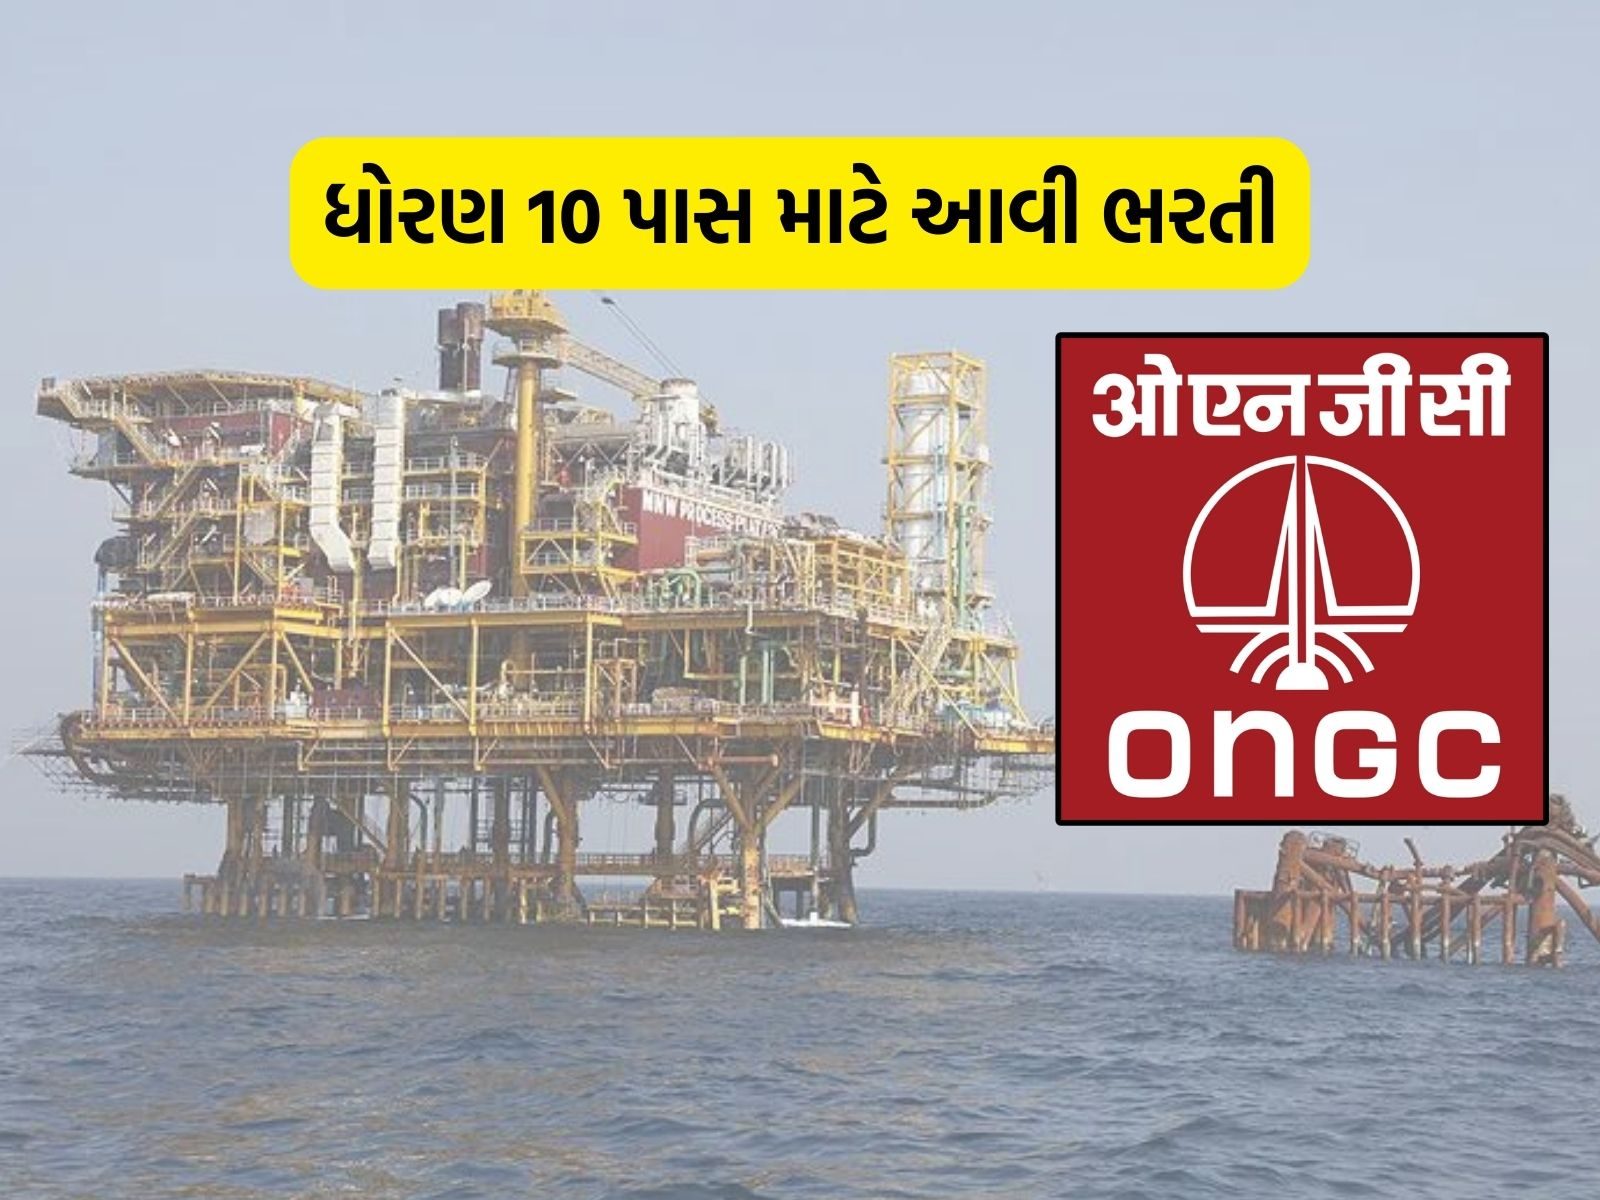 ONGC Limited  ONGC continues linking its legacy to the future by docking  its iconic drilling rig SagarSamrat converted to MOPU ONGC gratefully  recognizes the support of Ministry of Petroleum and Natural